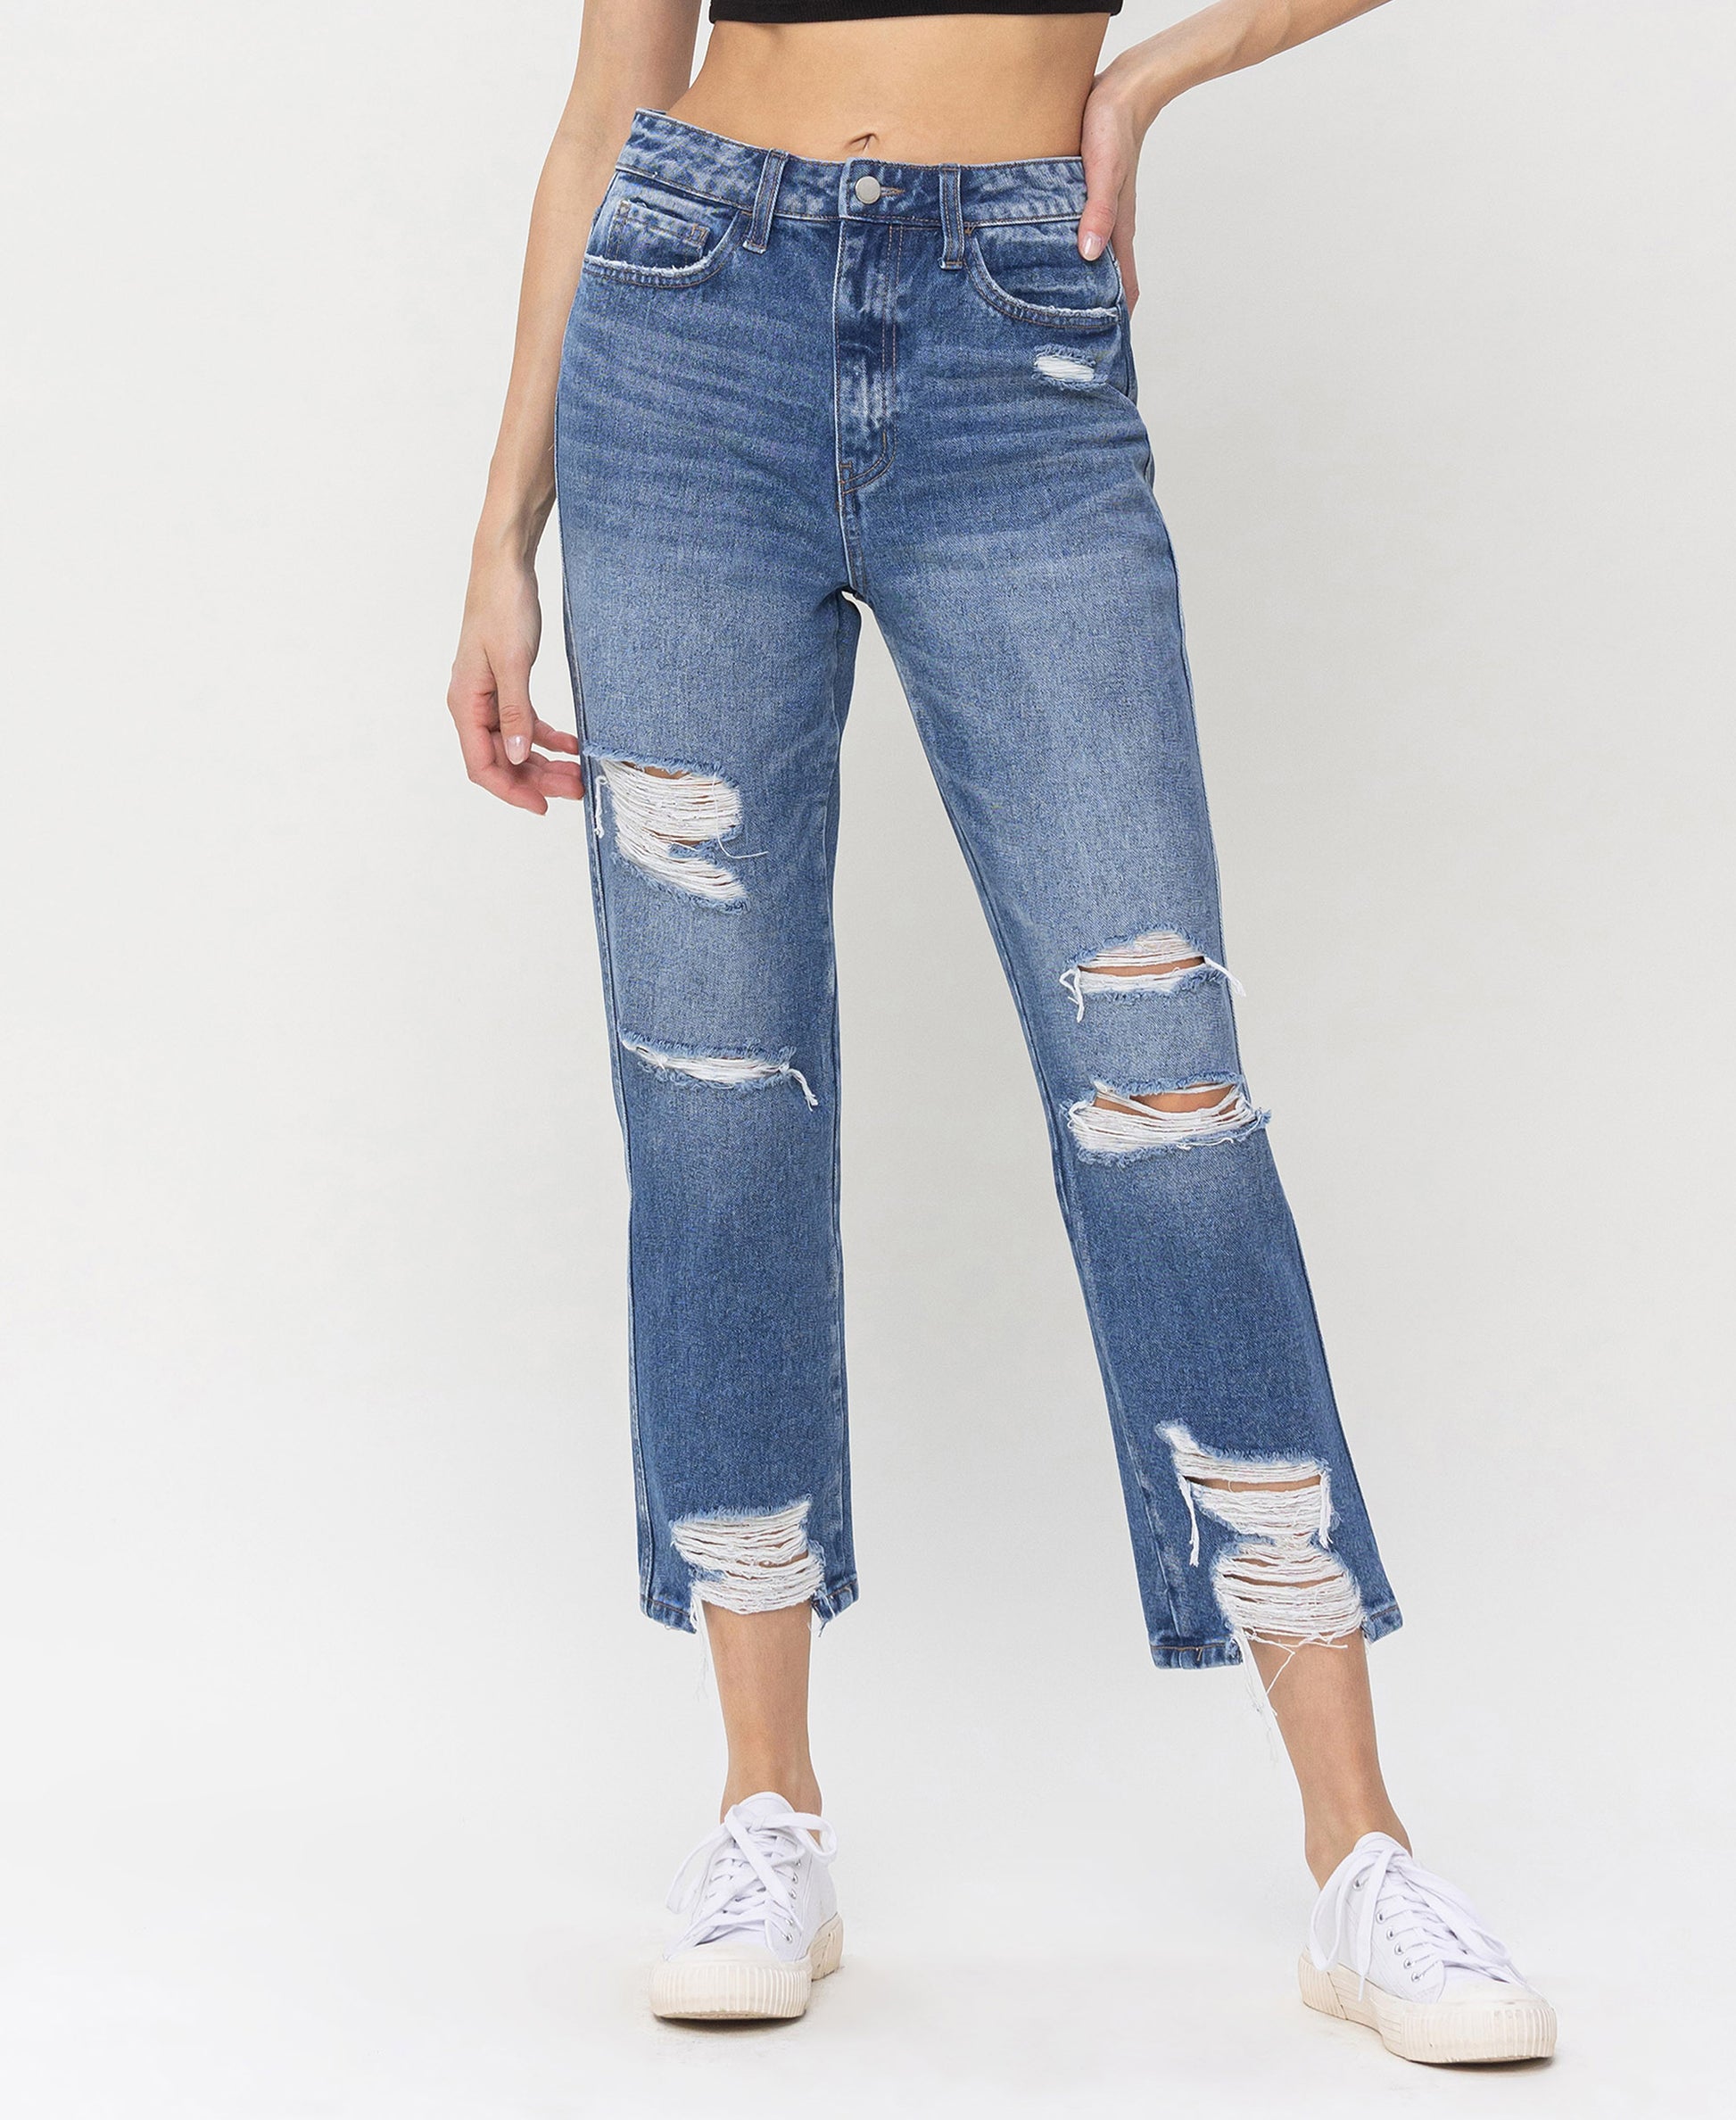 Front product images of Lolita - Super High Rise Straight Jeans